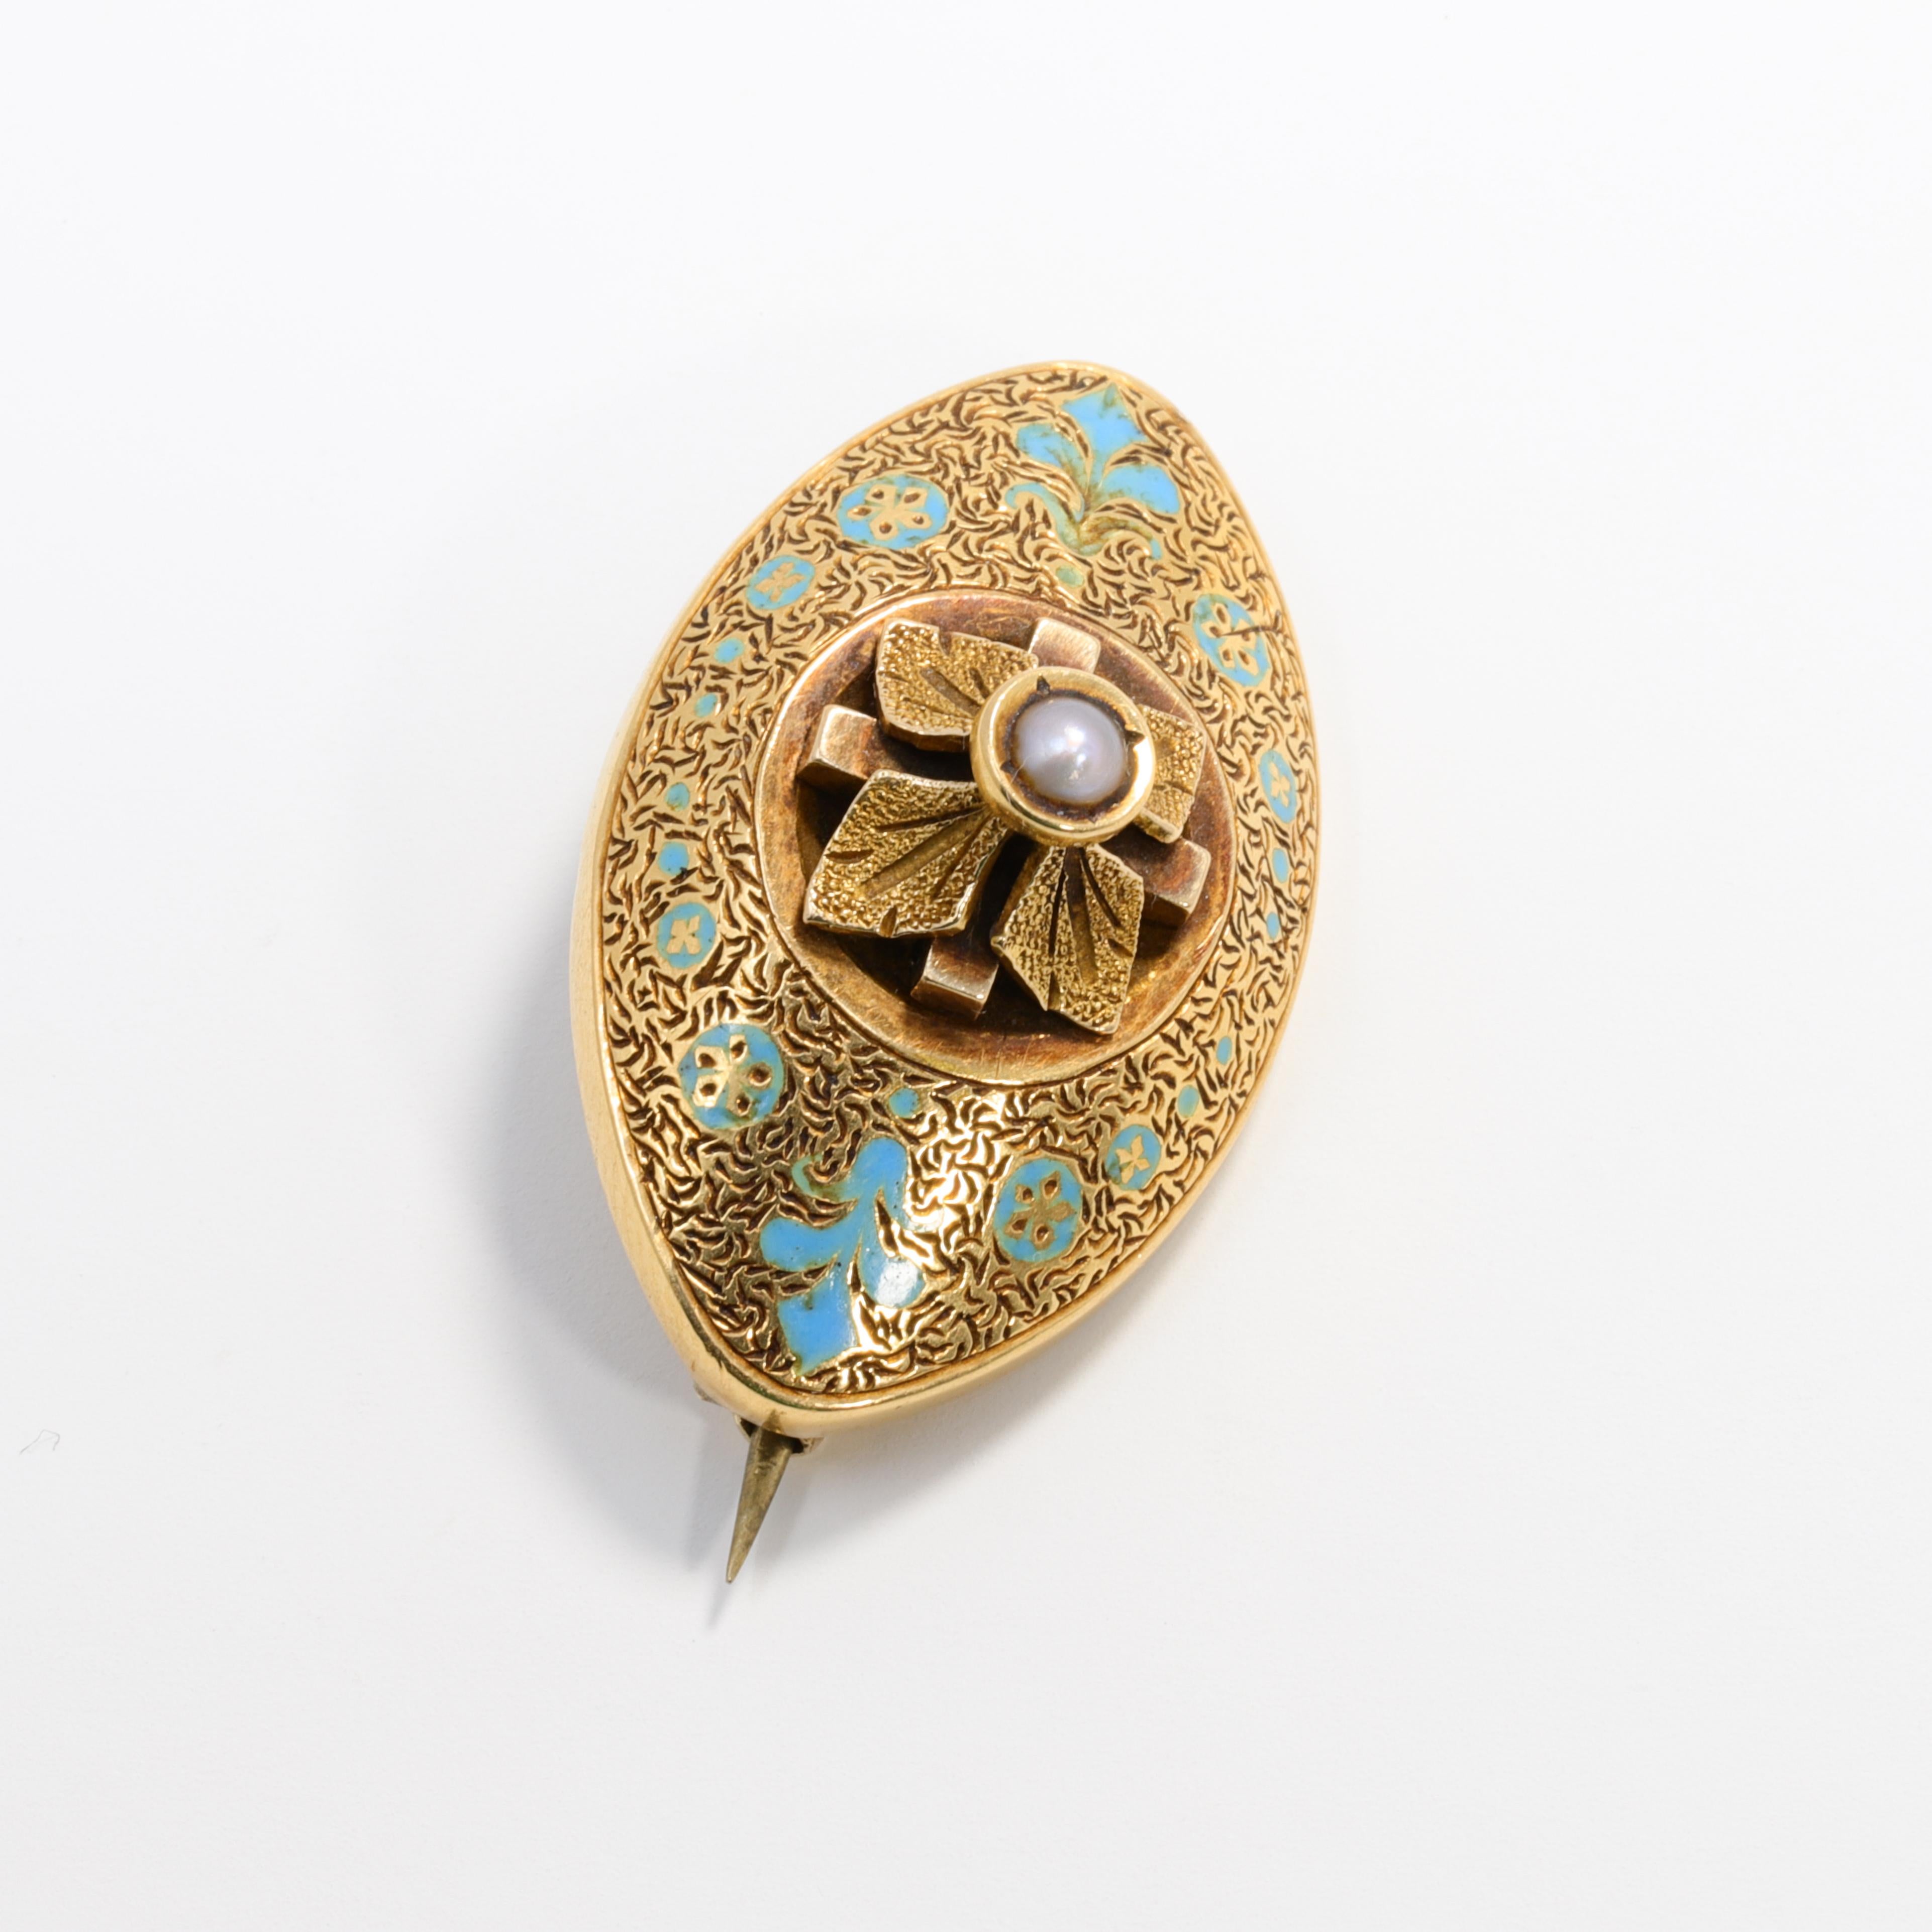 An ornate pin with intricate Taille D'Epargne black and light blue enameling, The centerpiece motif features accented leaves and an elevated genuine pearl. Gilt brass, antique hook clasp. Can be worn as either a brooch or pendant!

W 2.8 cm x L 1.7